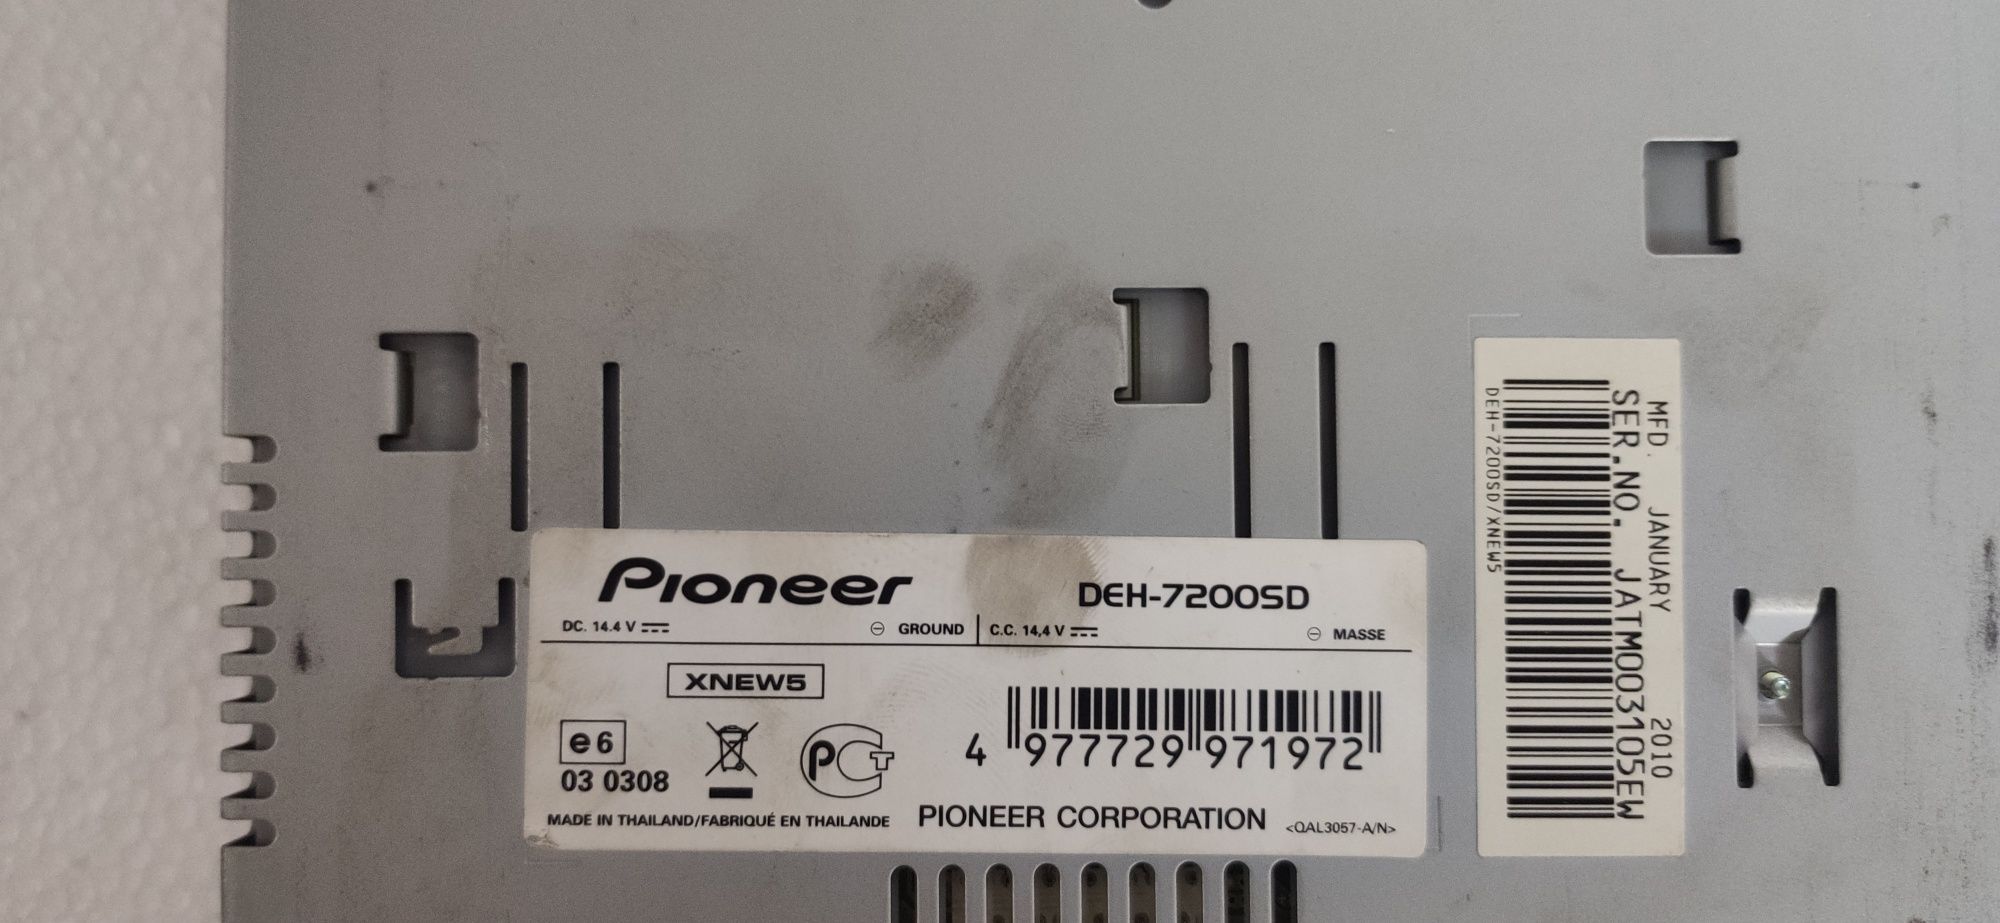 Pioneer deh 7200sd